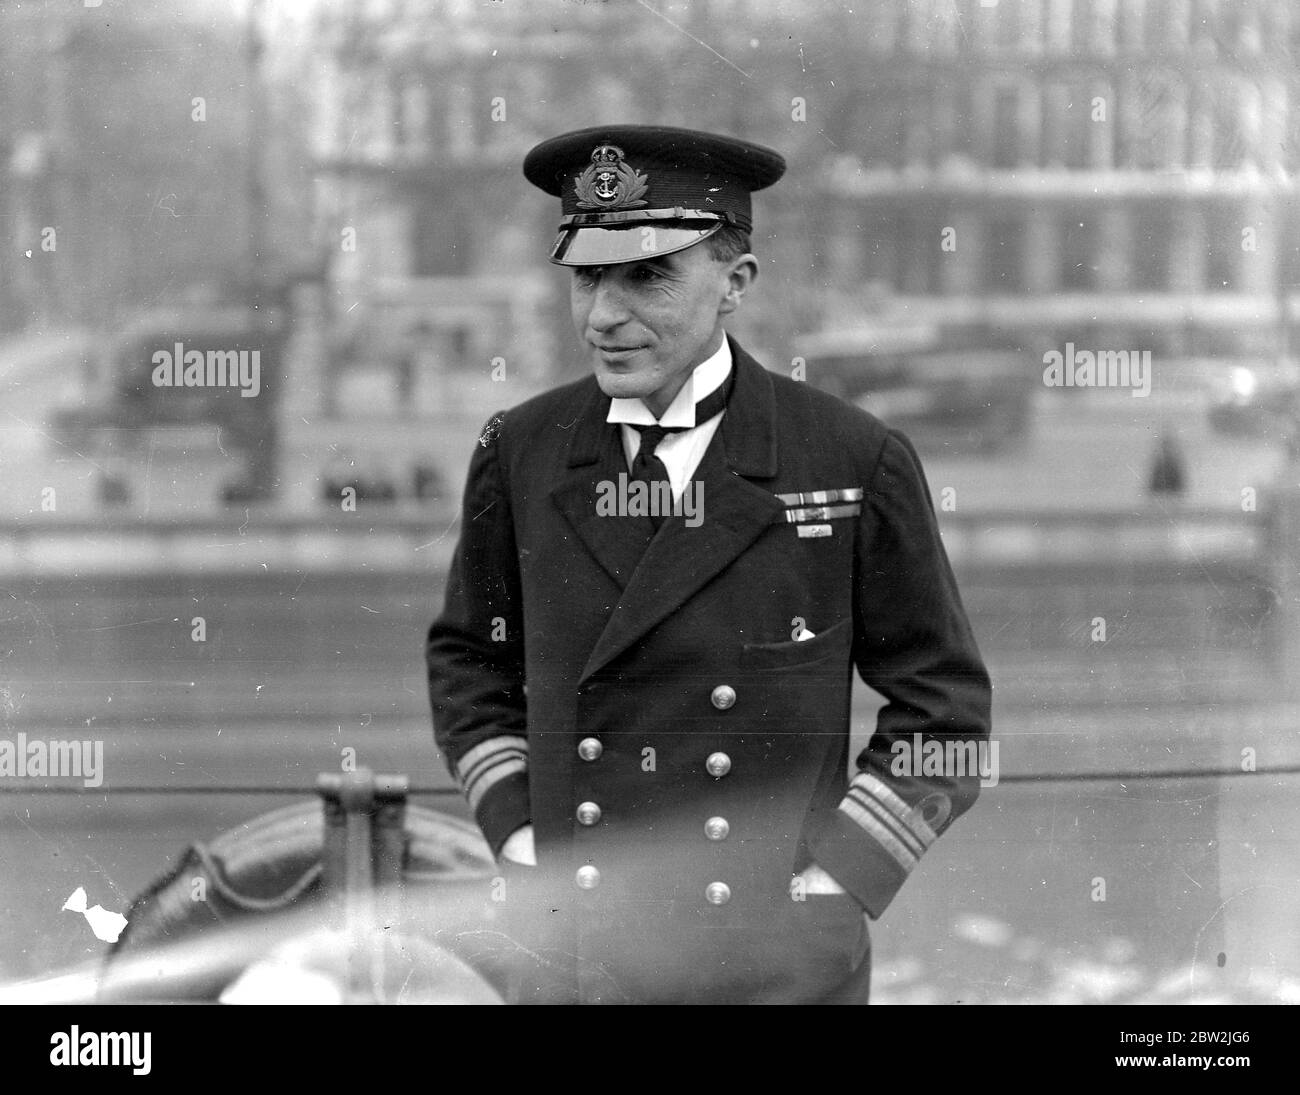 Lieut Commander Michell, M.V.O. D.S.O. R.N. of H.M.S. President, who was instrumental in rescuing a woman from the river Thames, London. 18 November 1926 Stock Photo